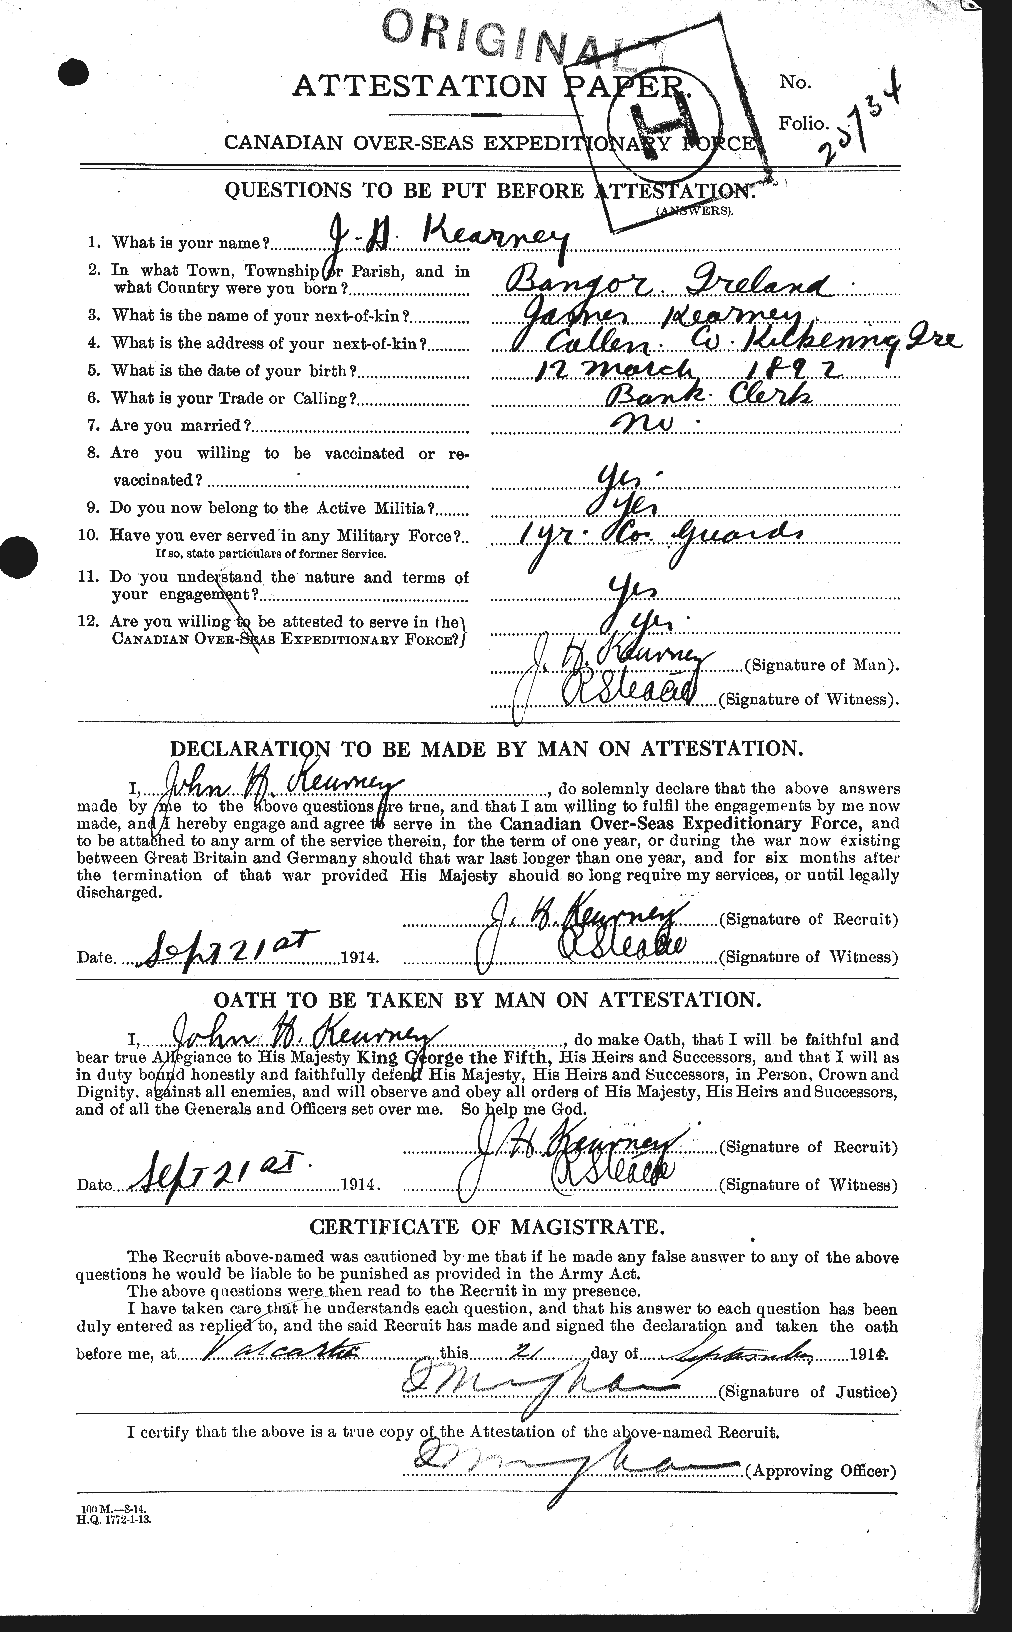 Personnel Records of the First World War - CEF 428043a